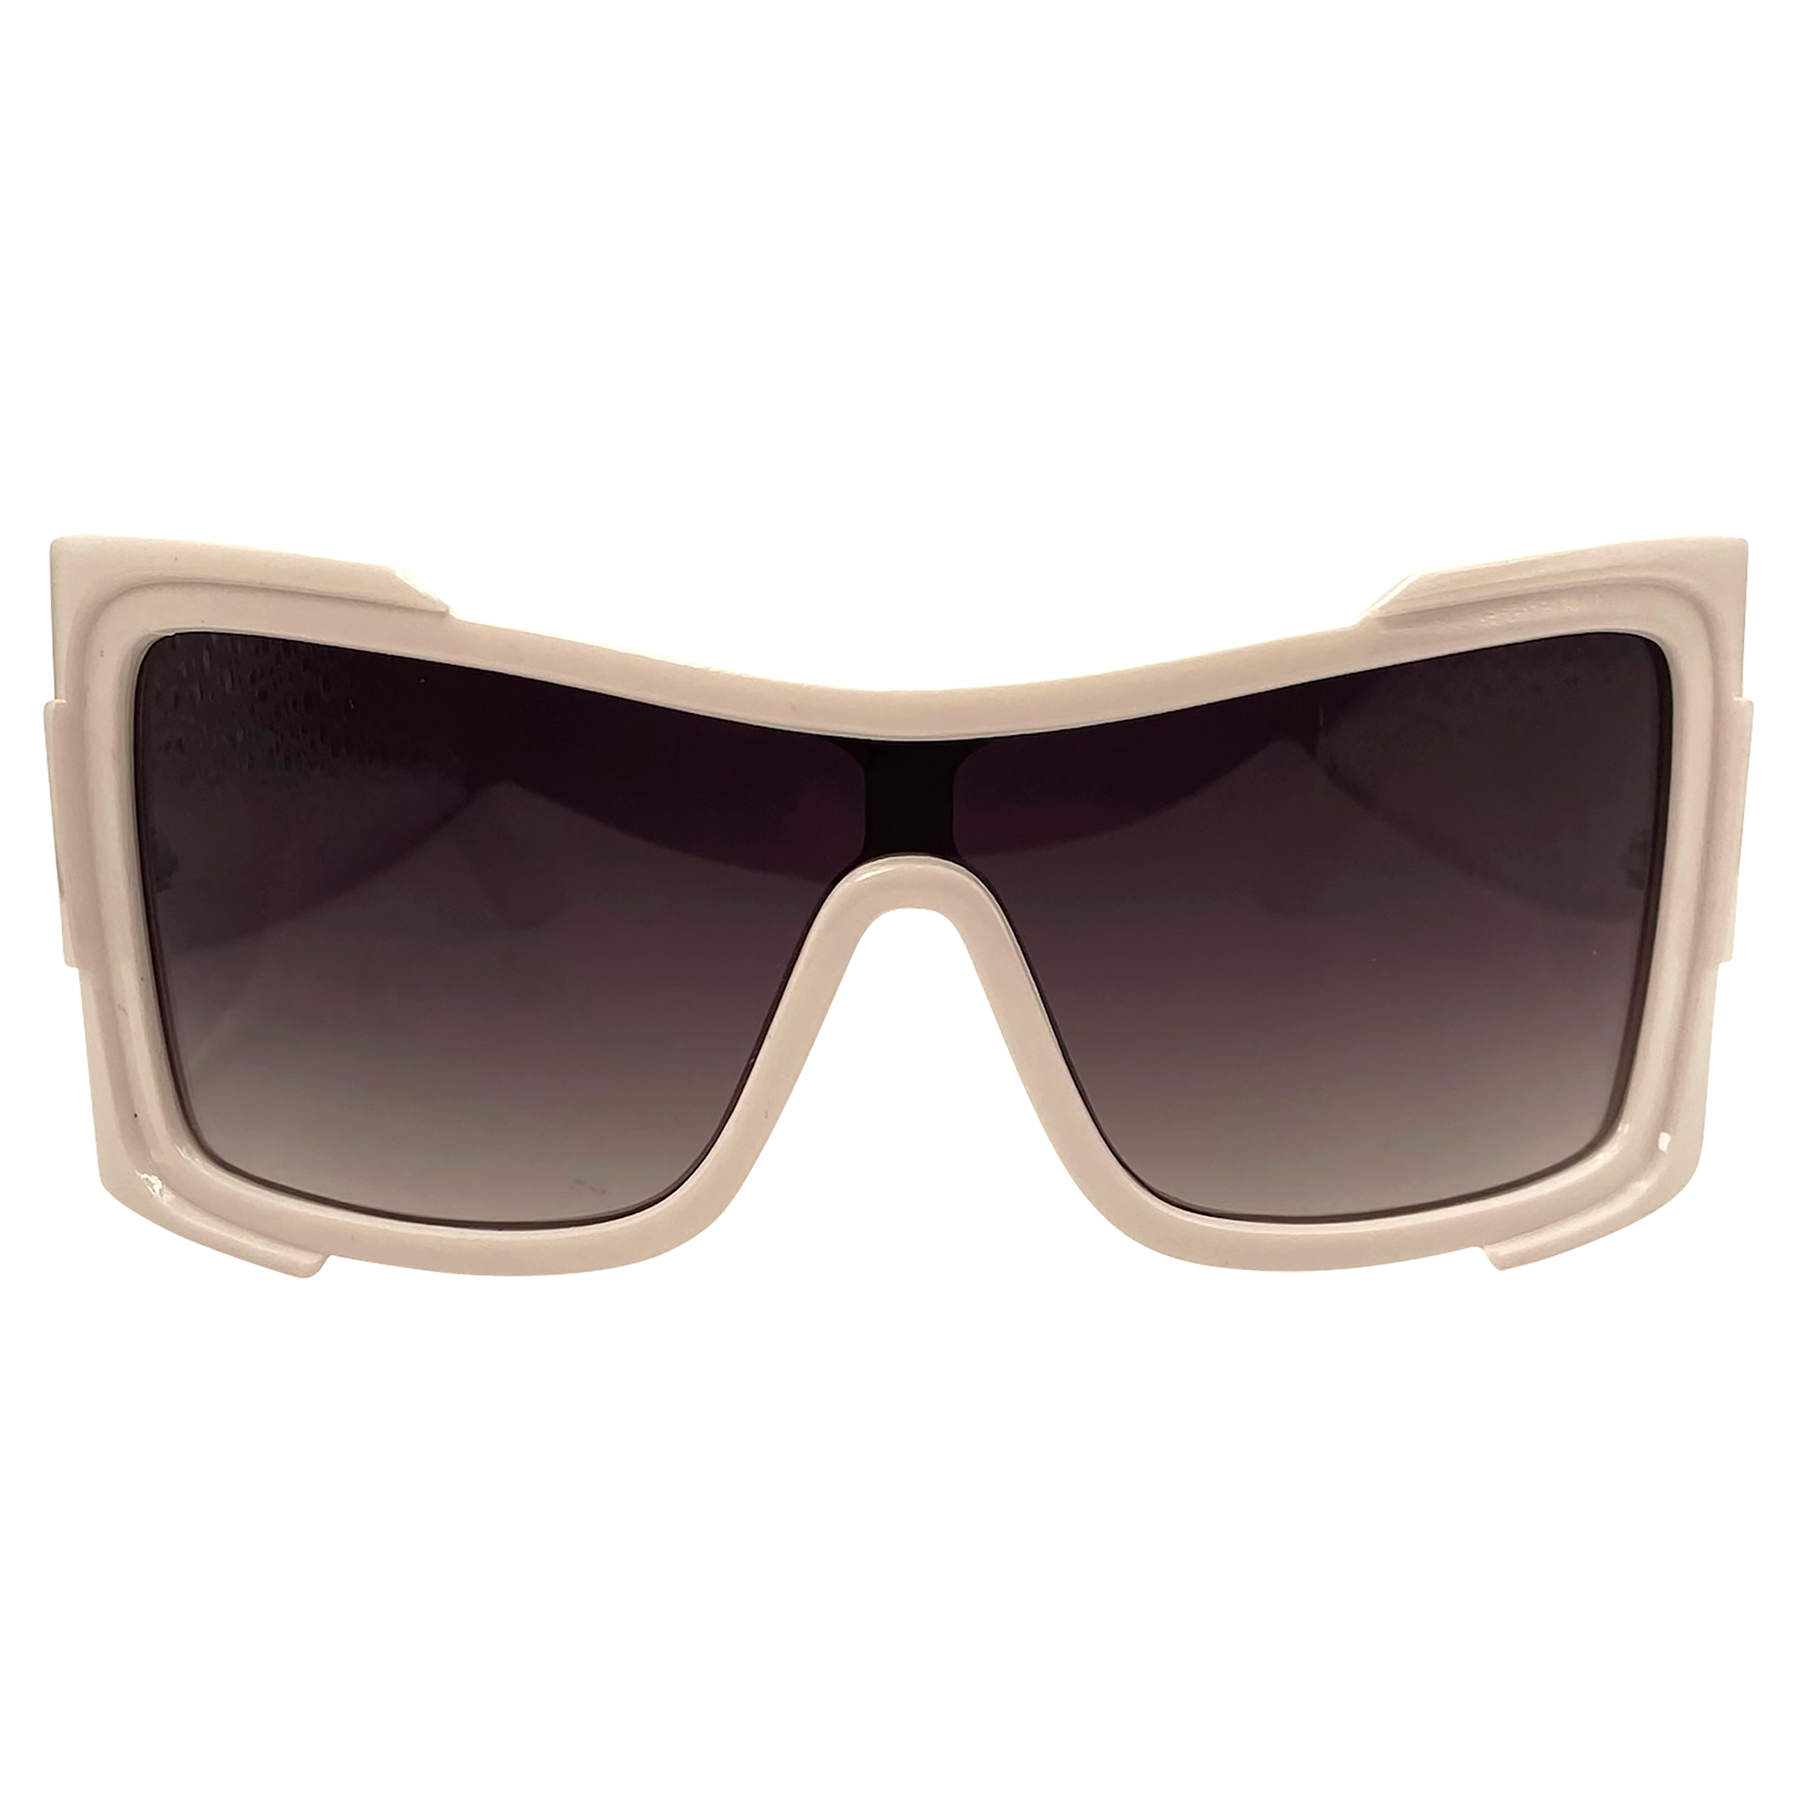 futuristic sunglasses with smoke lens and white oversized shield style